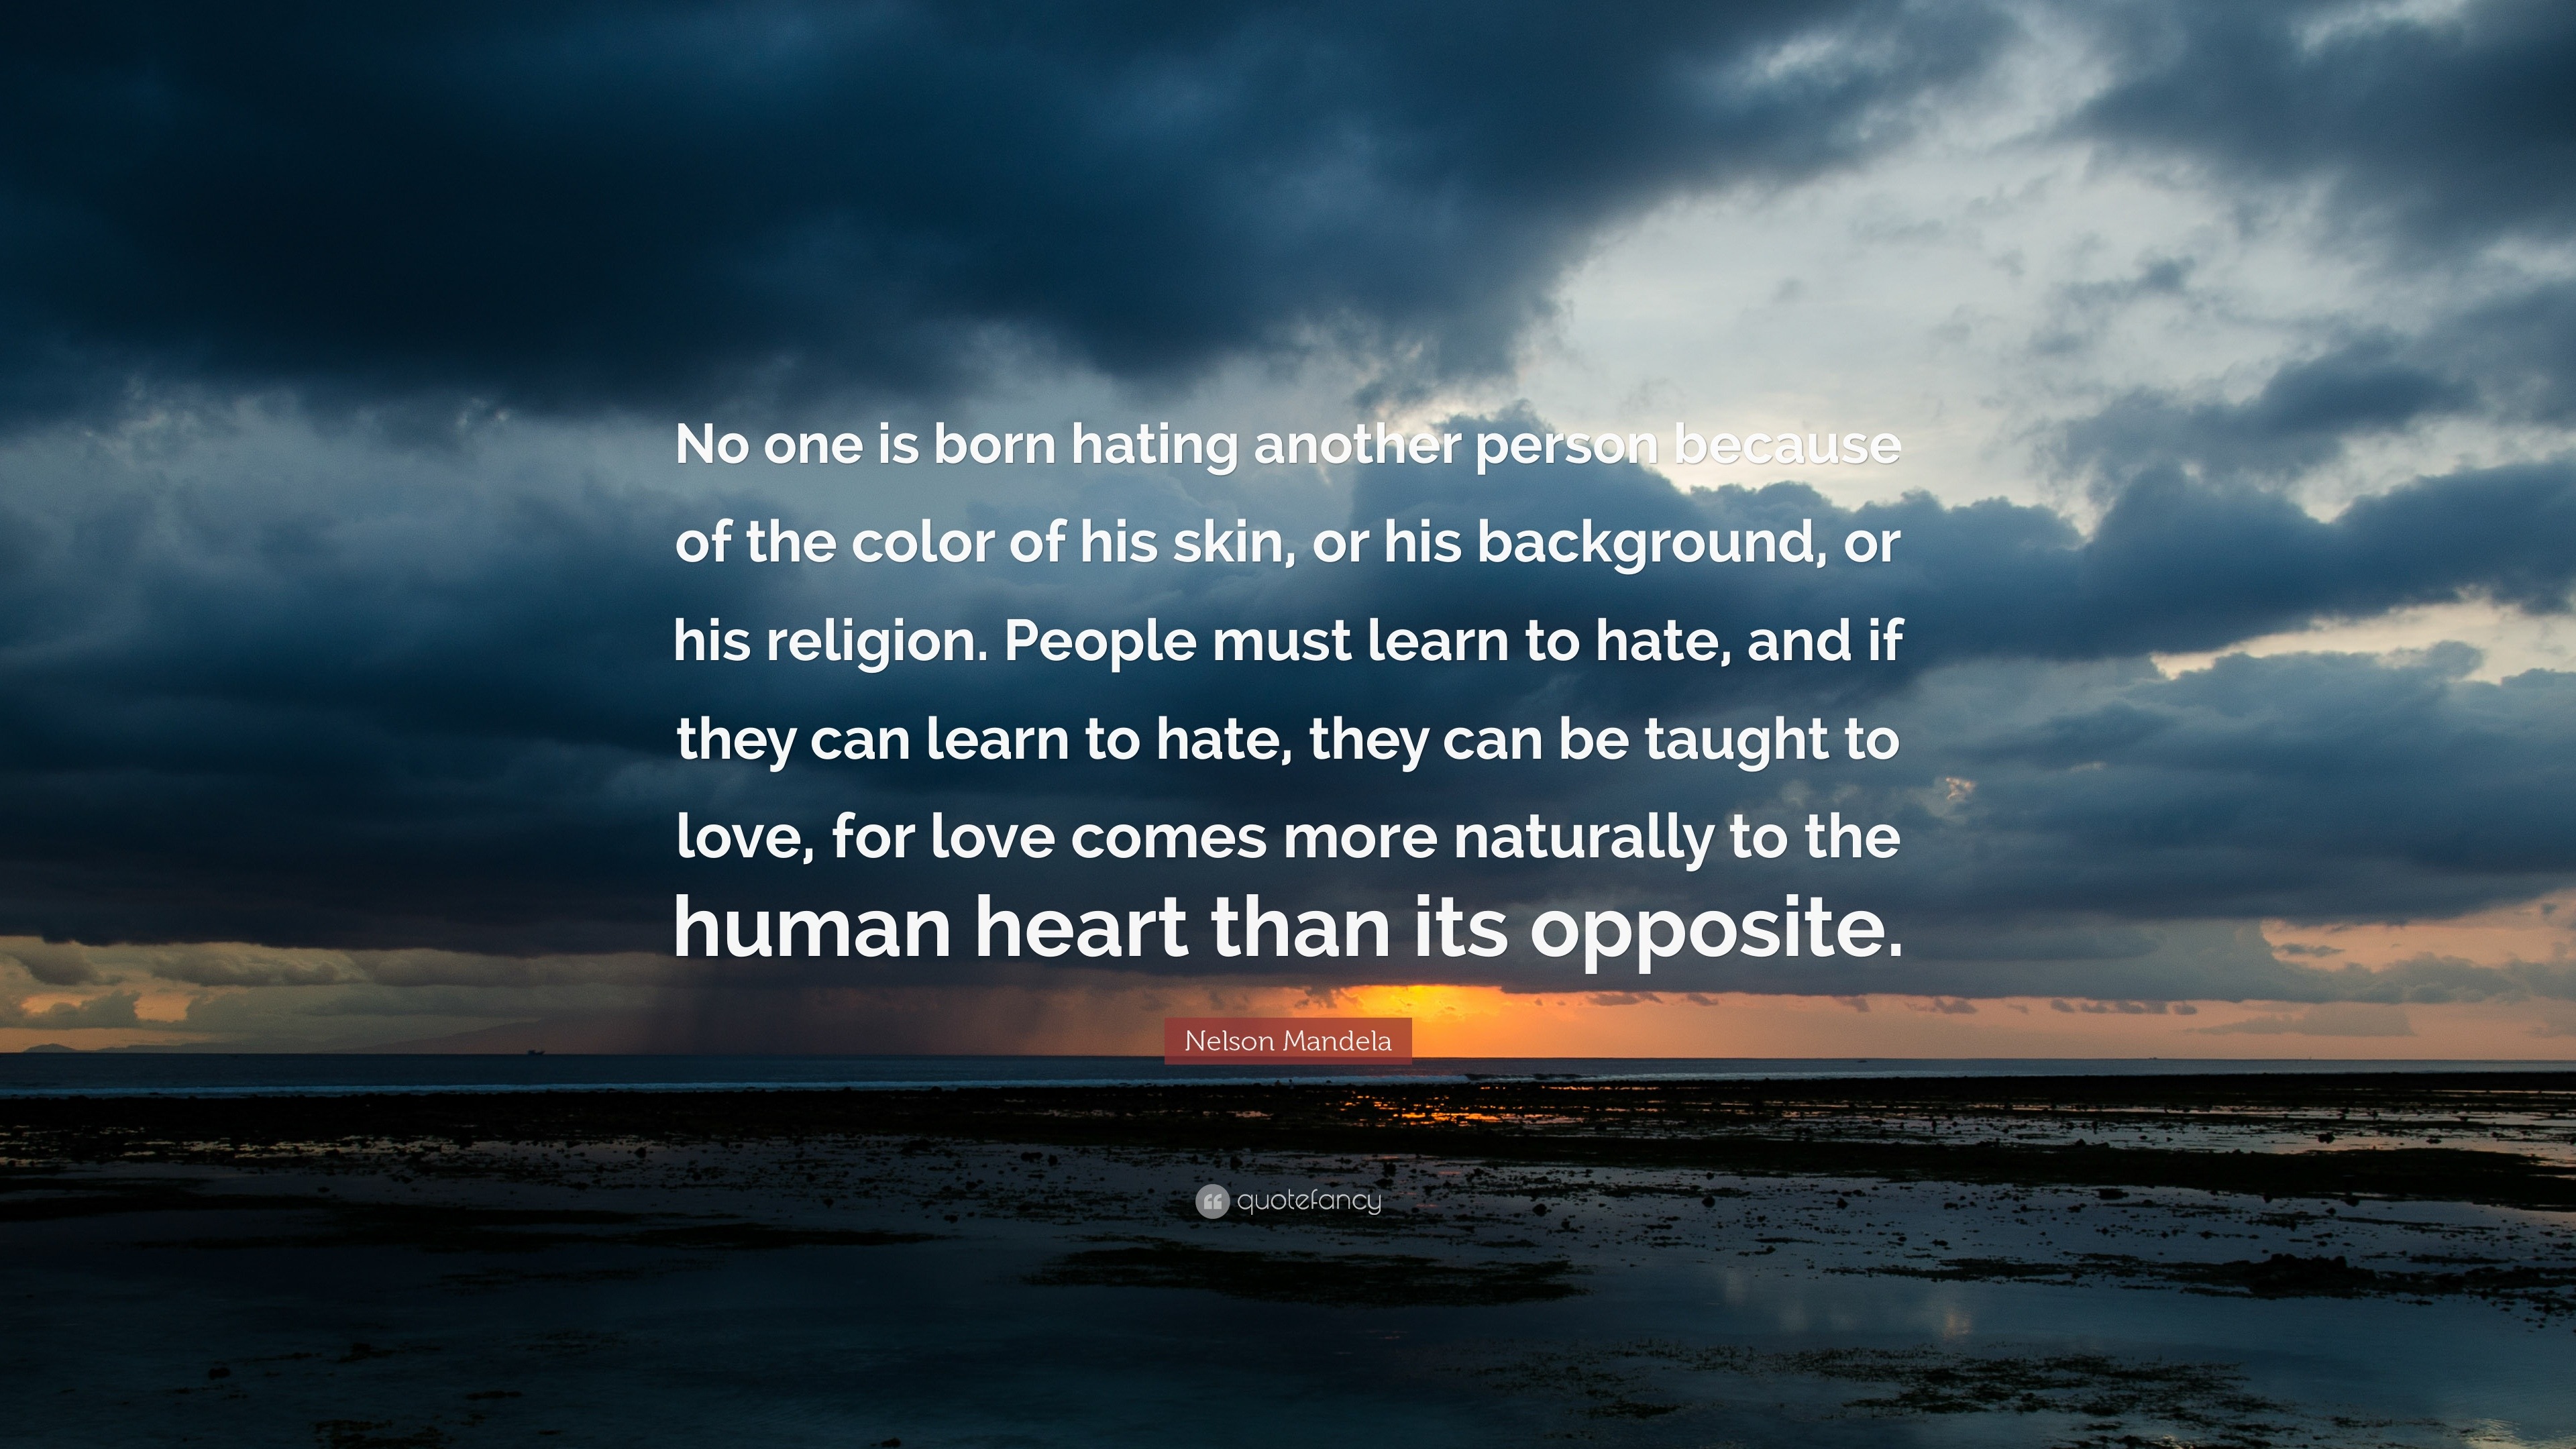 Nelson Mandela Quote: "No one is born hating another person because of the color of his skin, or ...